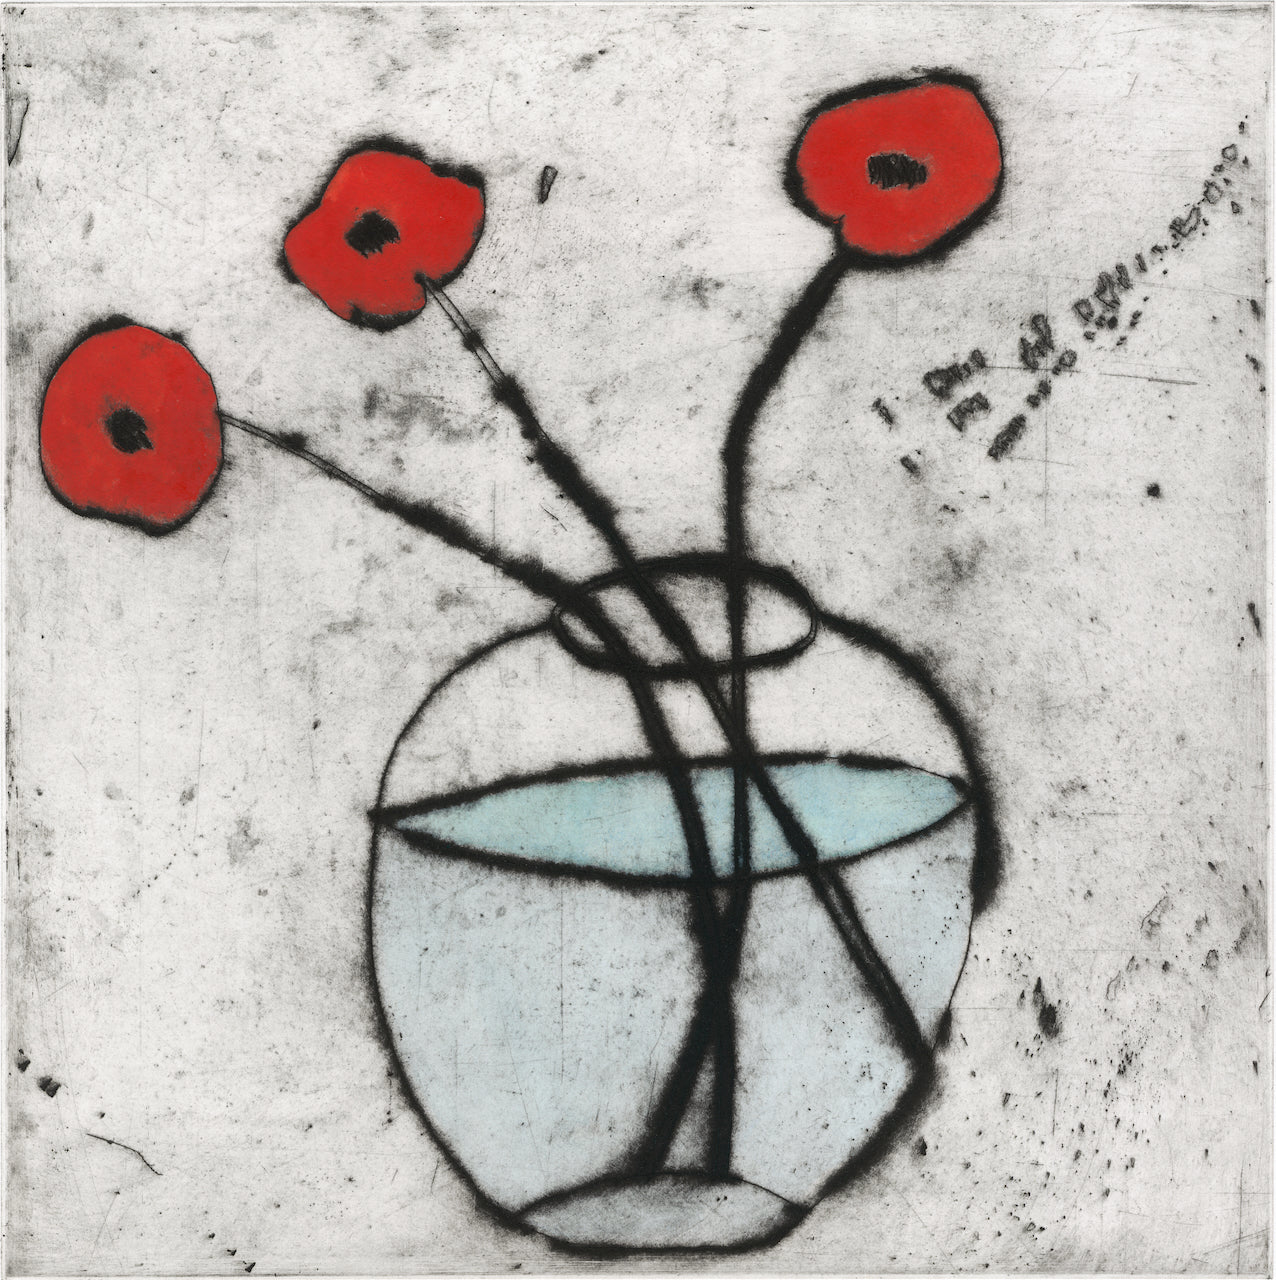 Bright Poppies - Limited Edition drypoint and watercolour fine art print by artist Richard Spare depicting three poppies in a glass vase